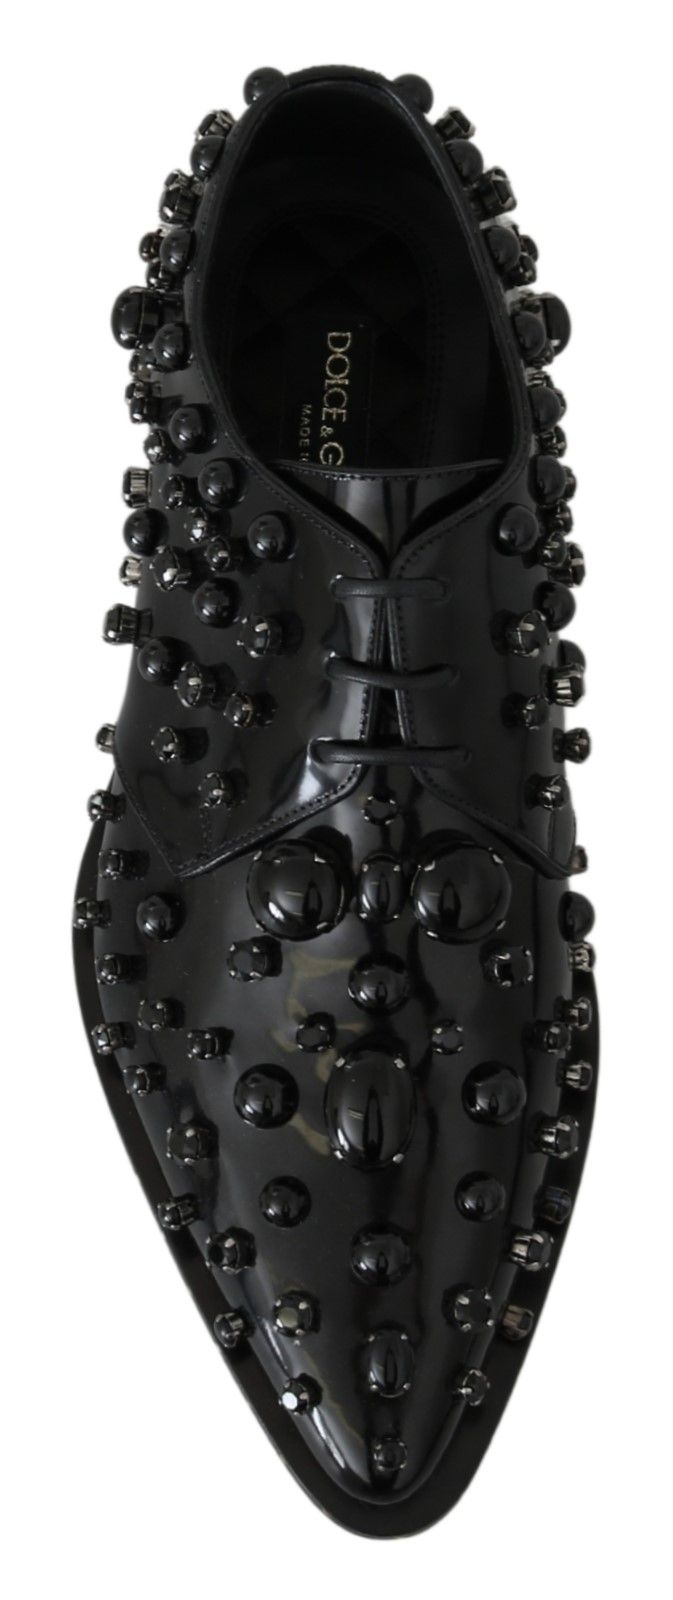 Dolce & Gabbana Black Leather Crystals Dress Broque Shoes